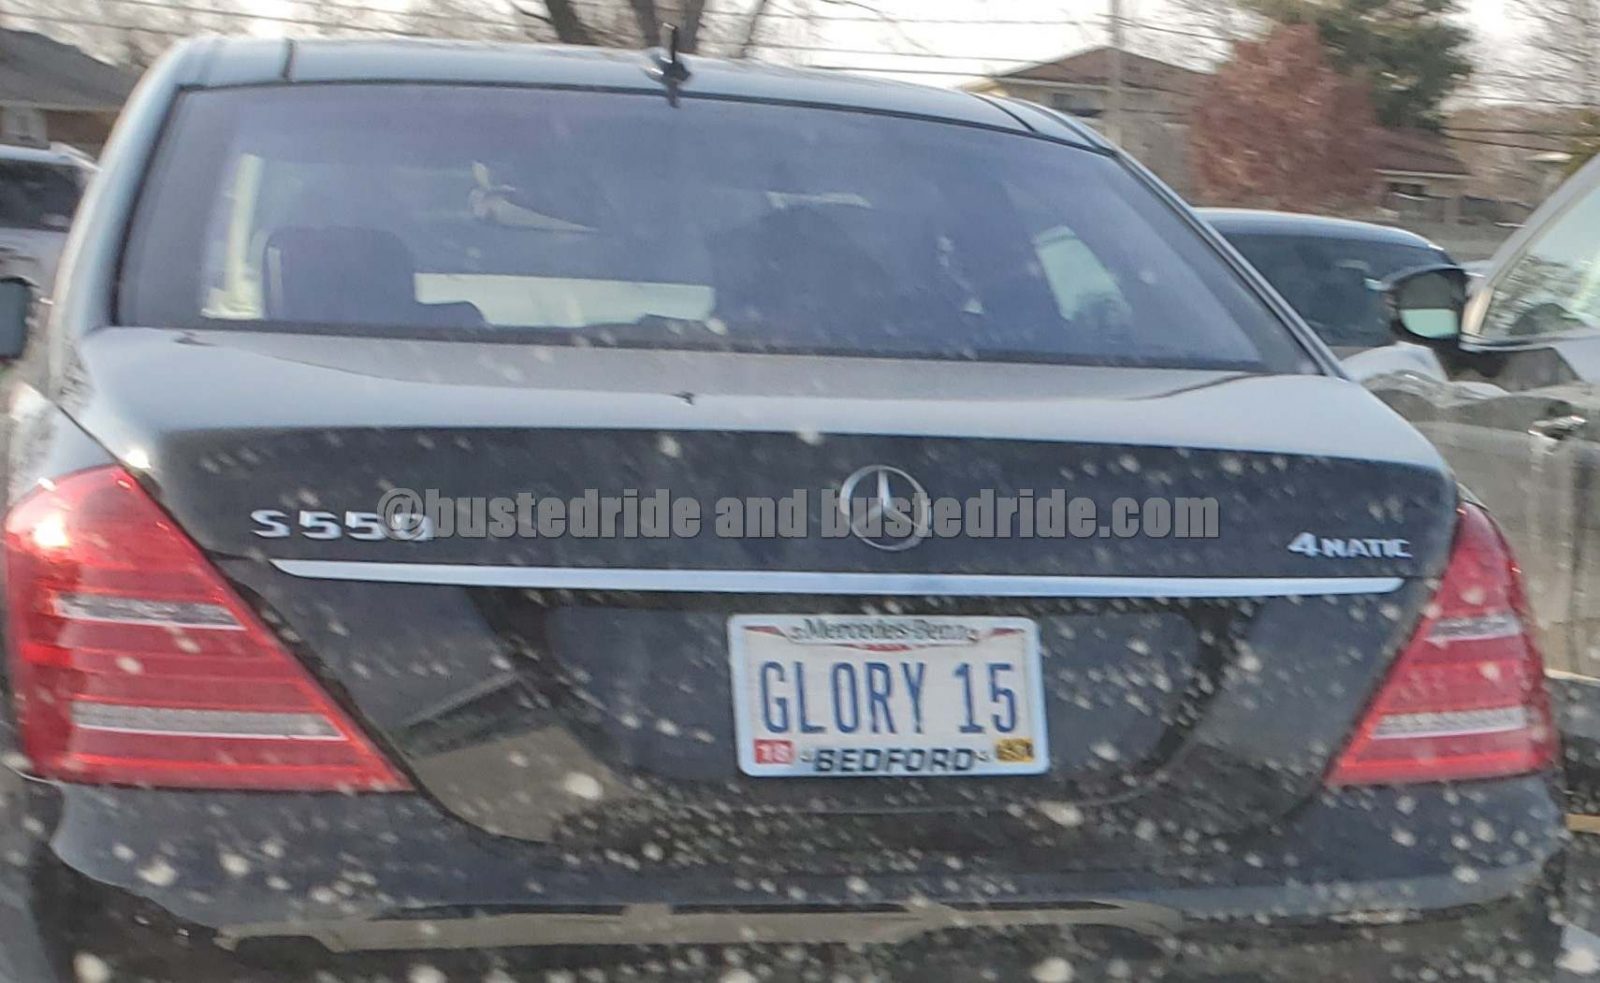 GLORY 15 - Vanity License Plate by Busted Ride